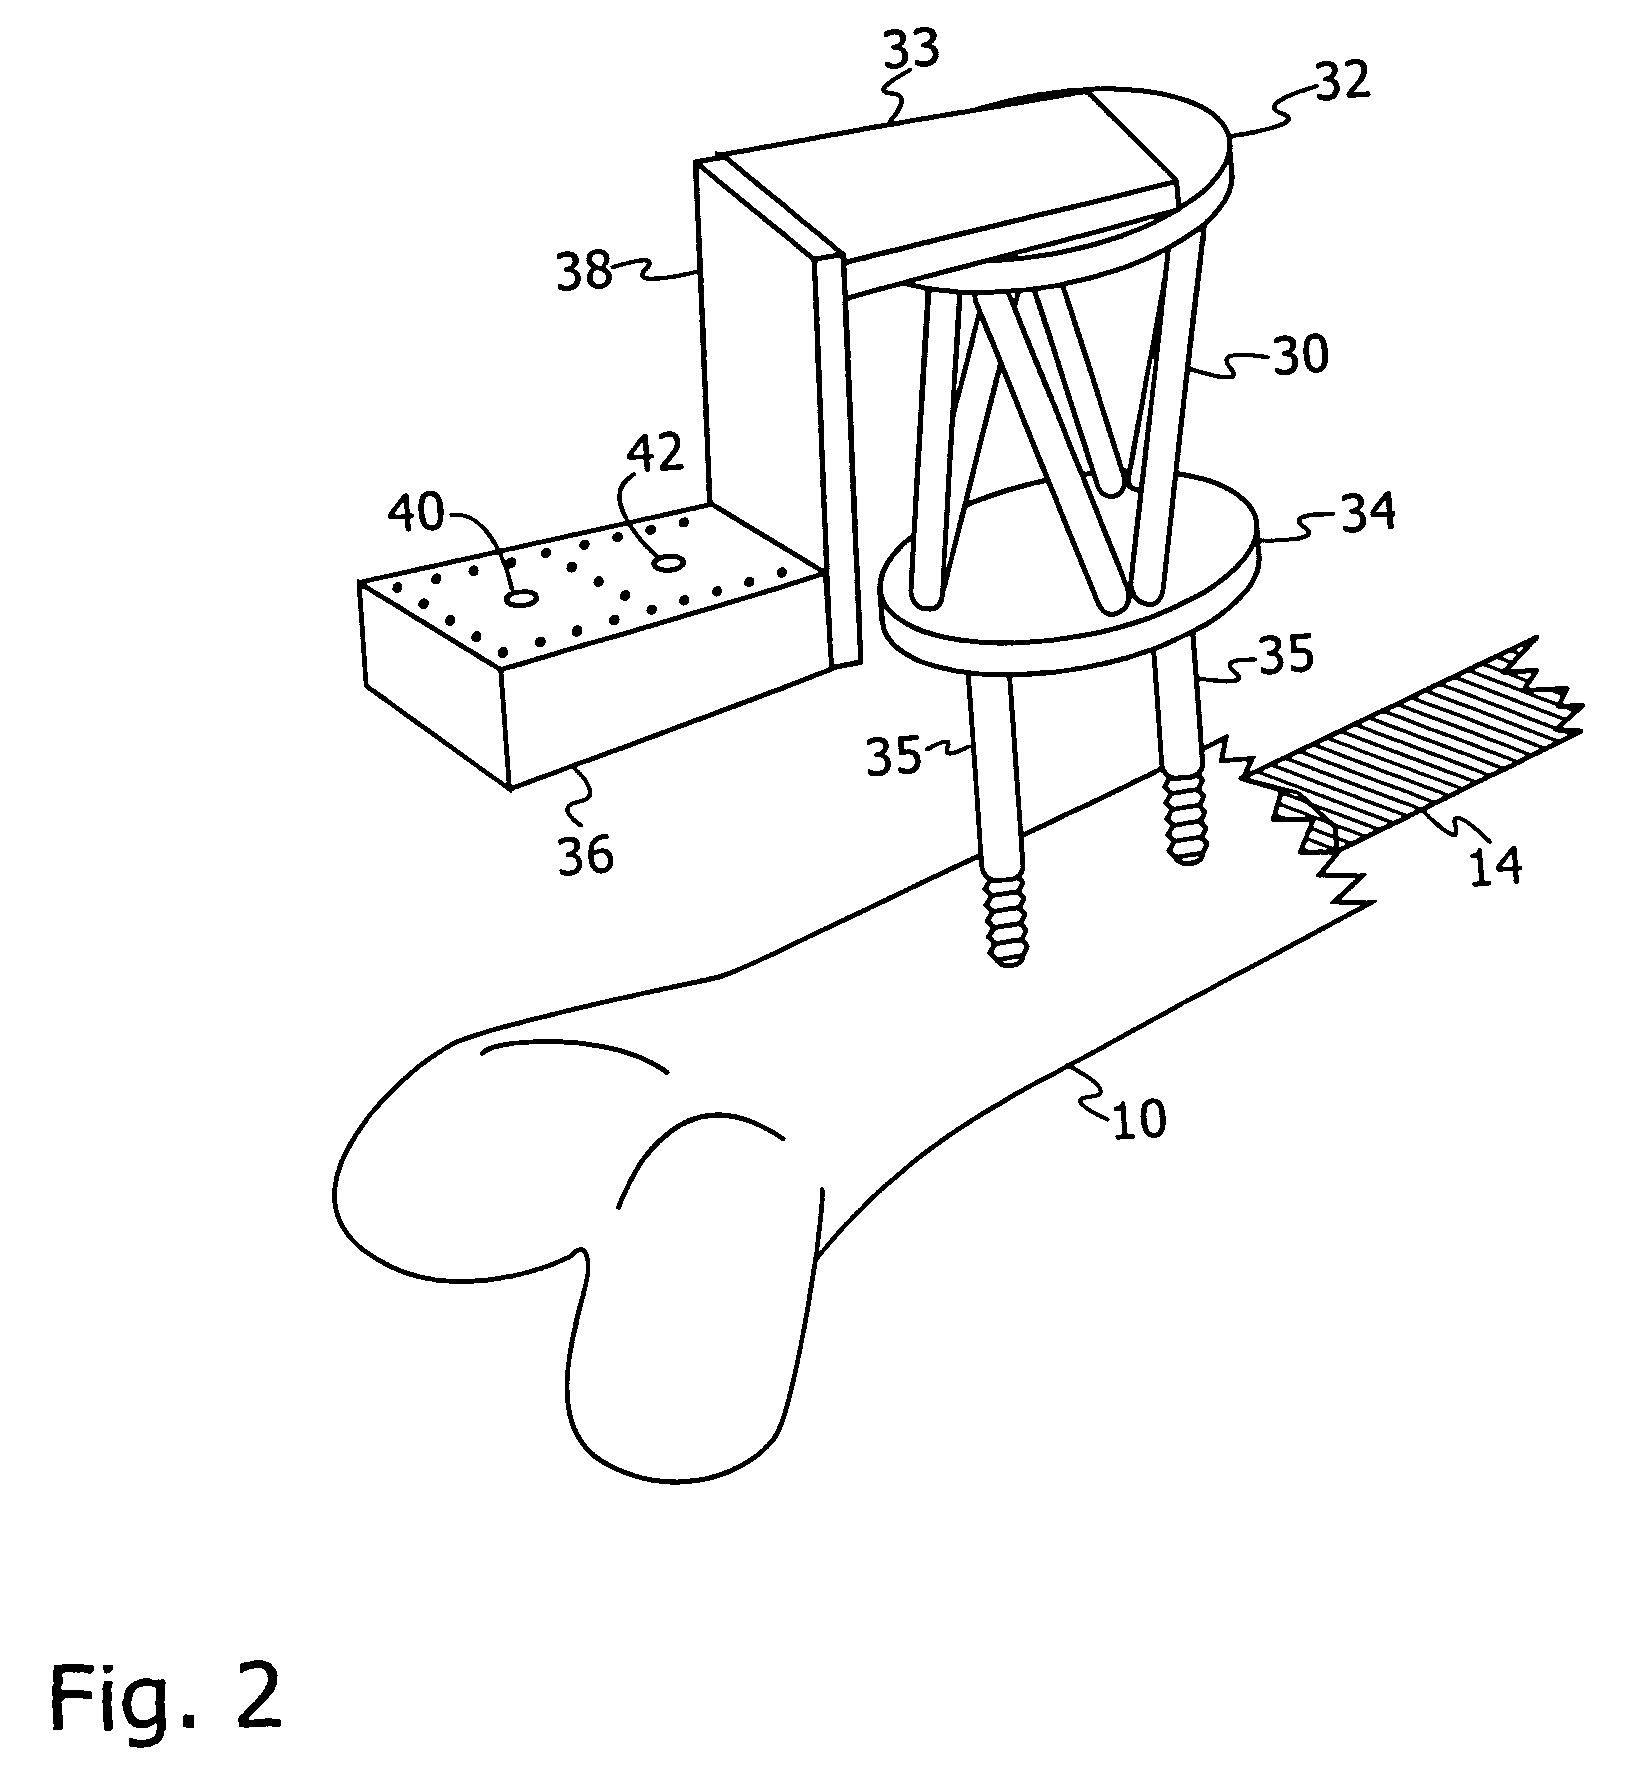 Robotic method for use with orthopedic inserts